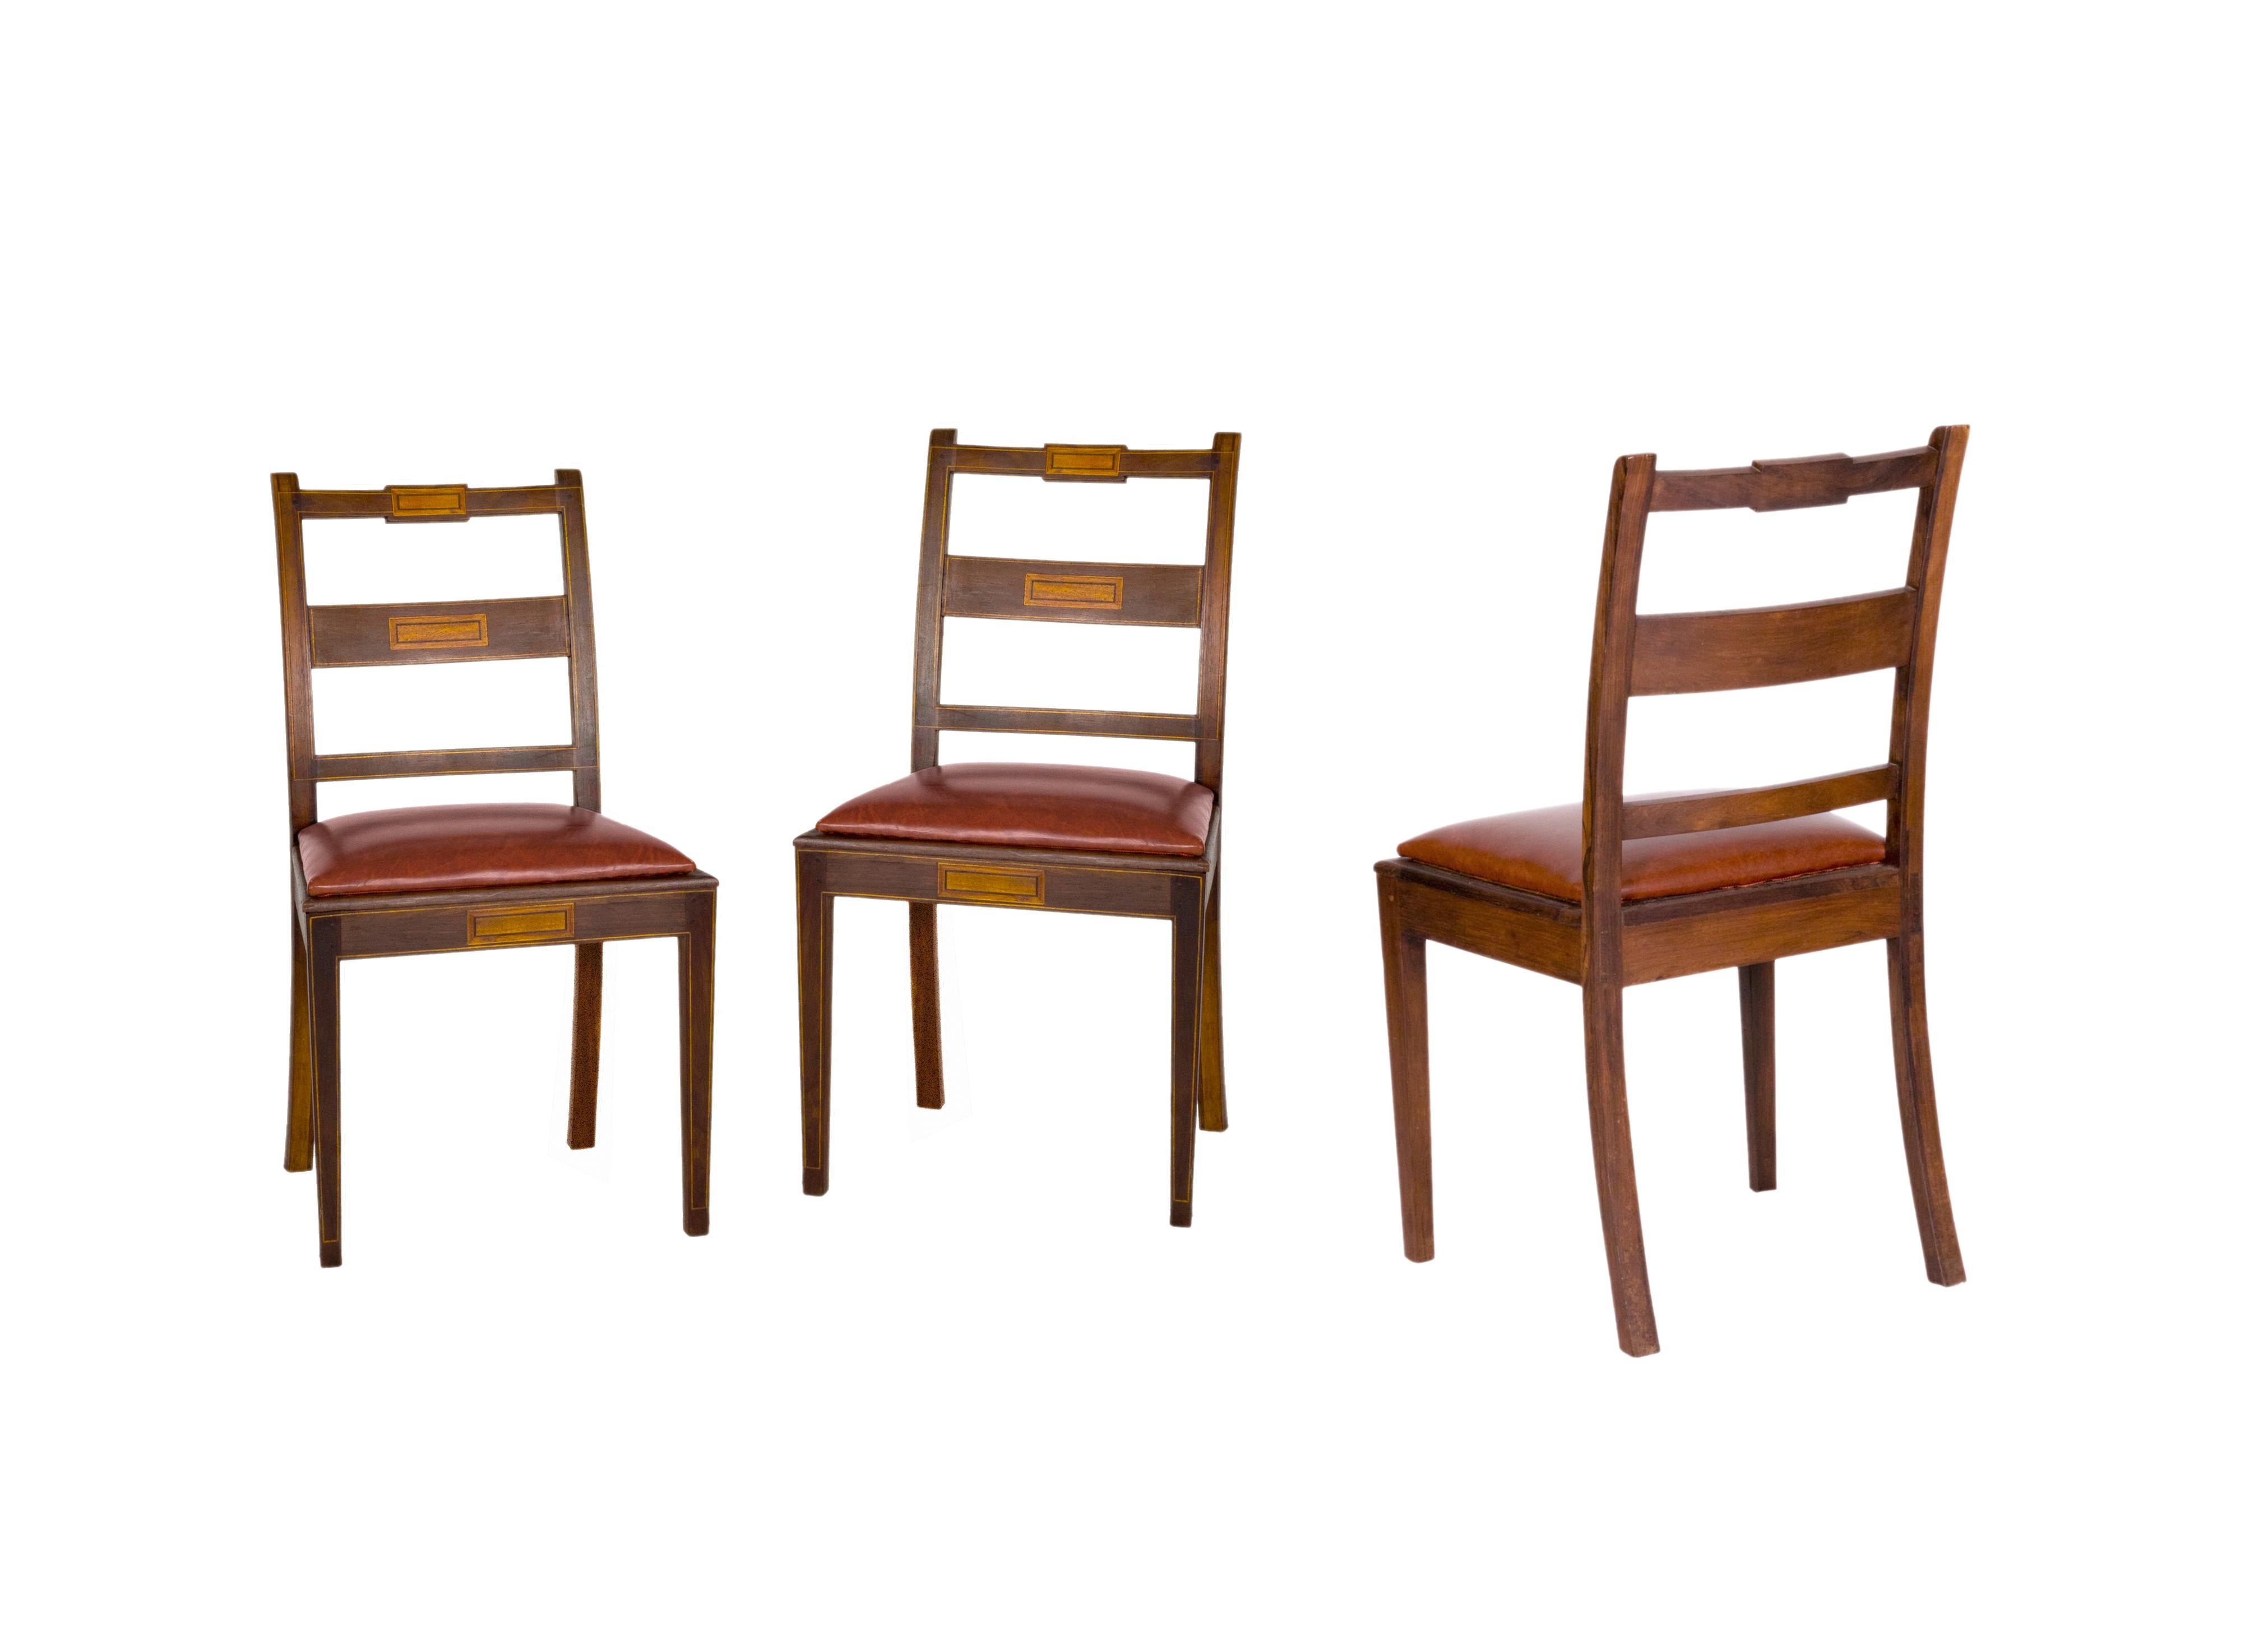 Set of Six Portuguese Chairs, Straw & Leather, 20th Century For Sale 3